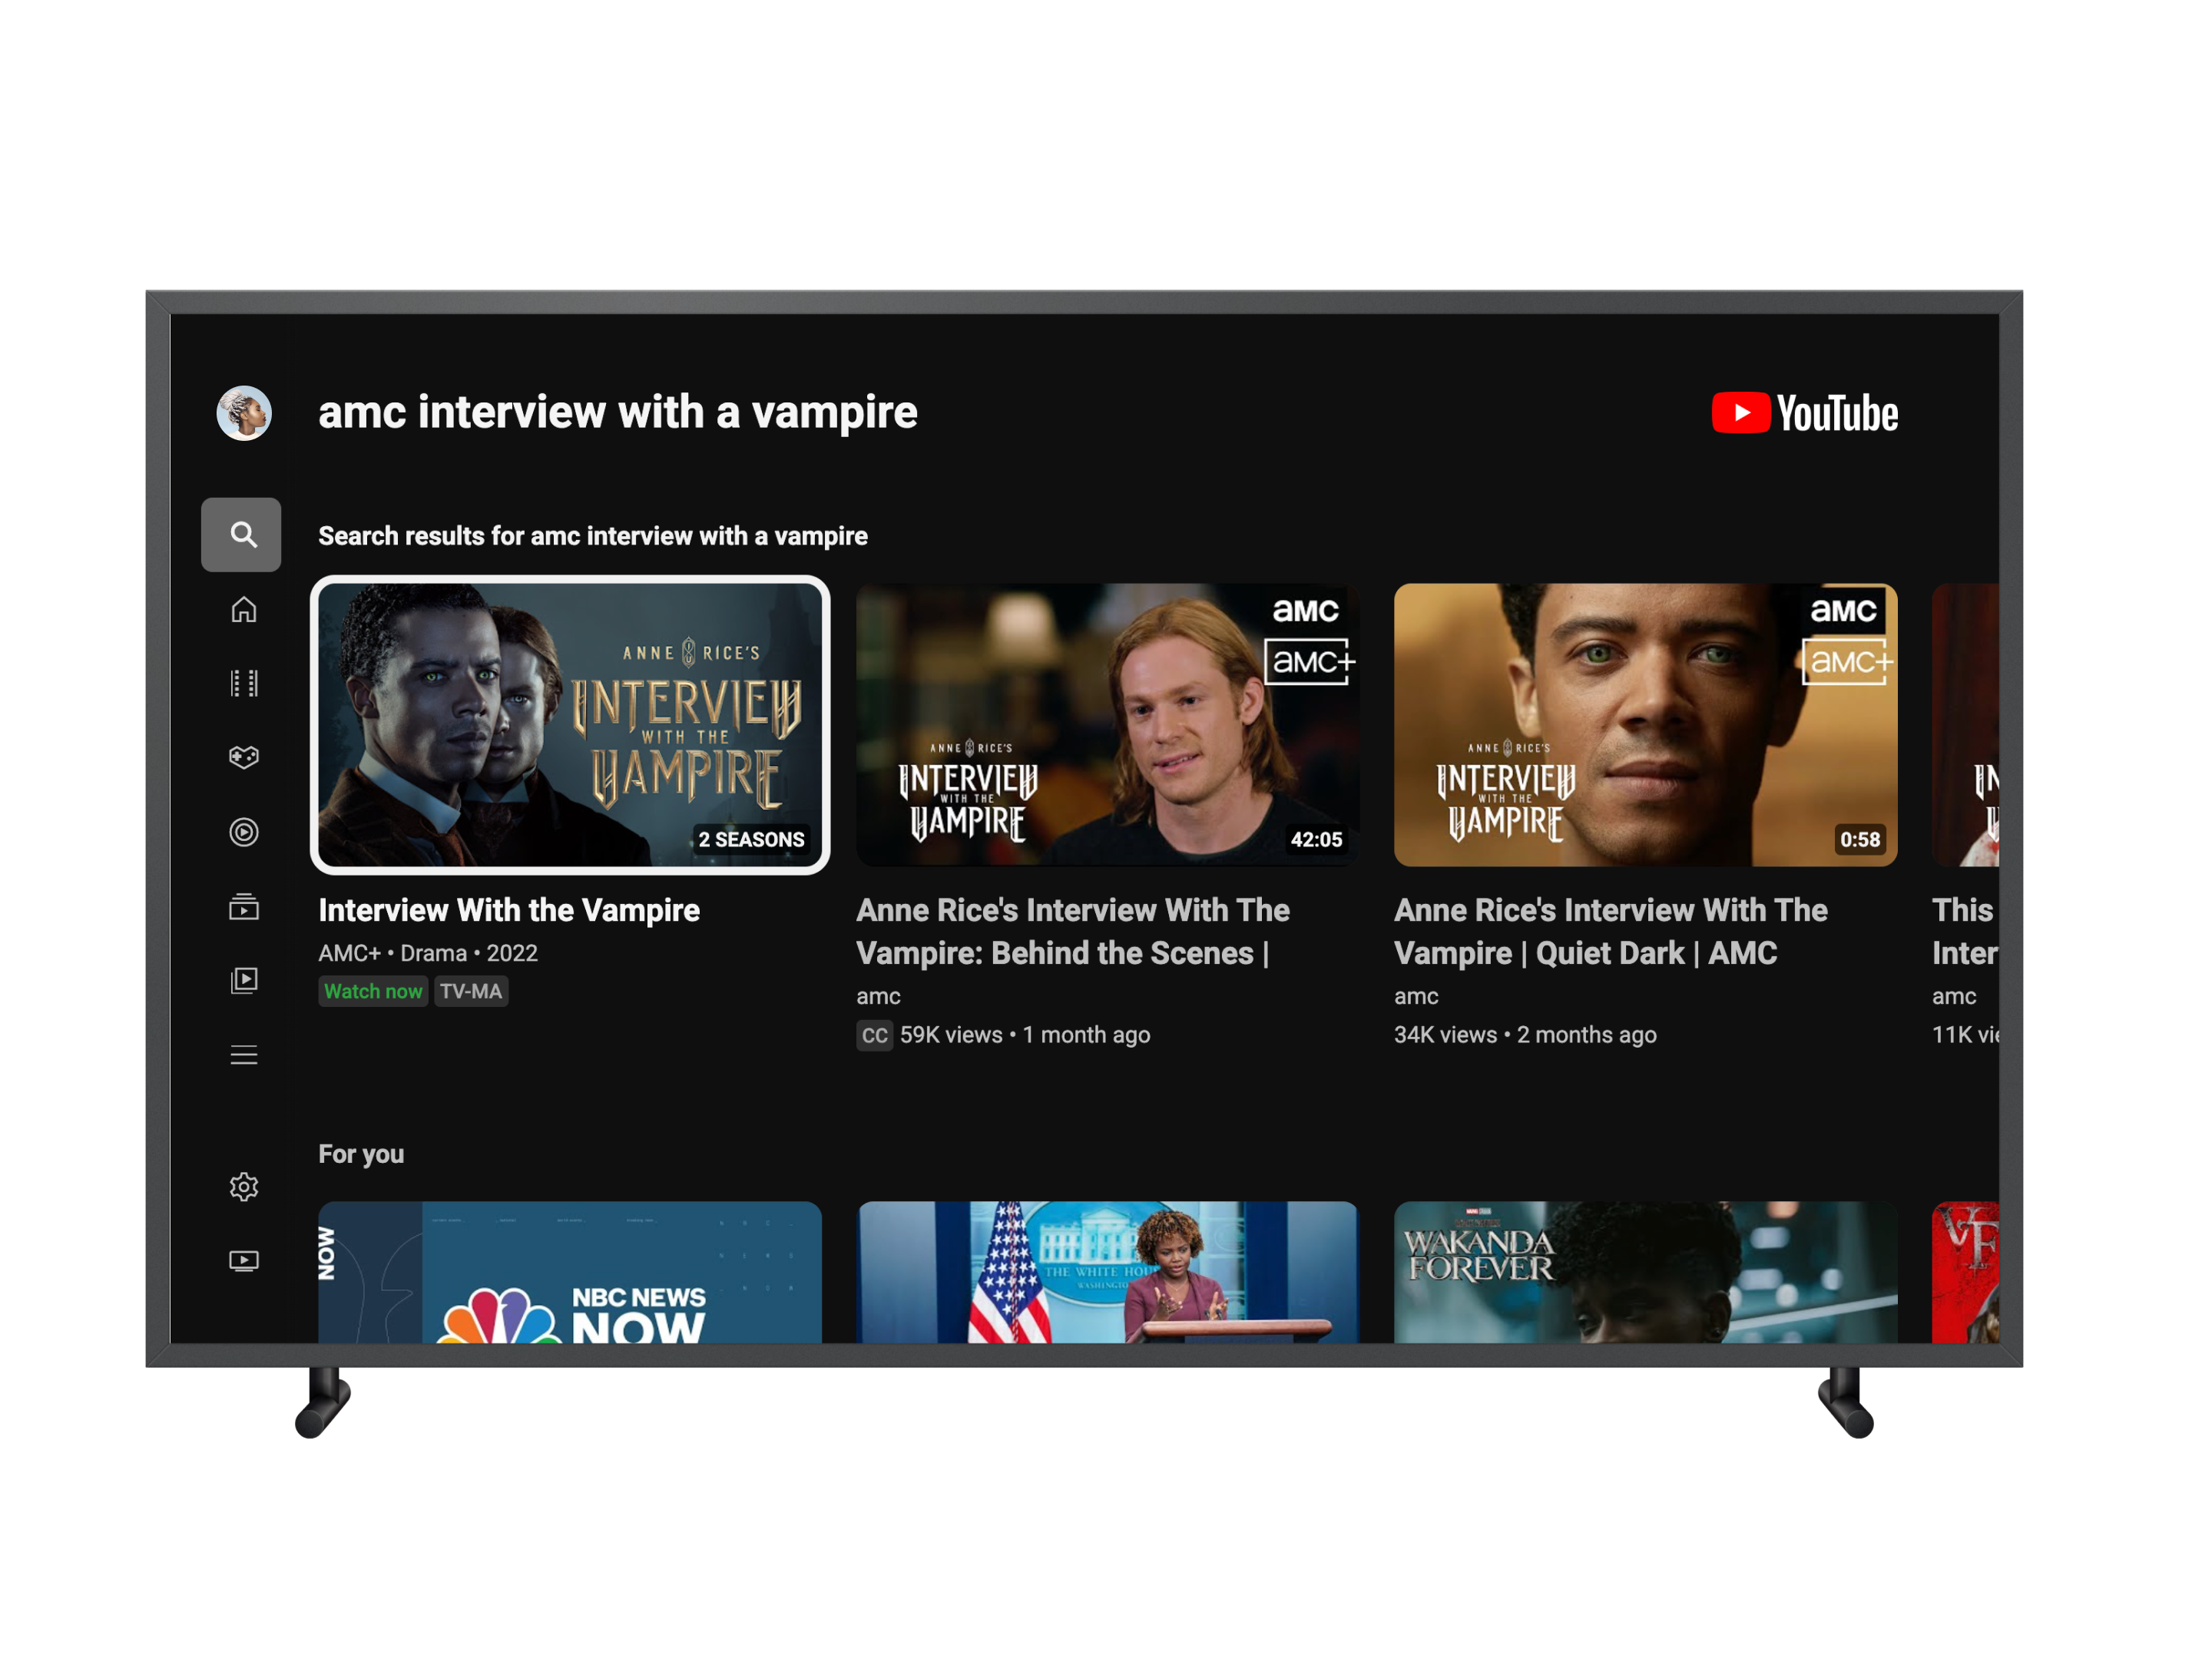 Get more of your favorite content on YouTube with Primetime Channels